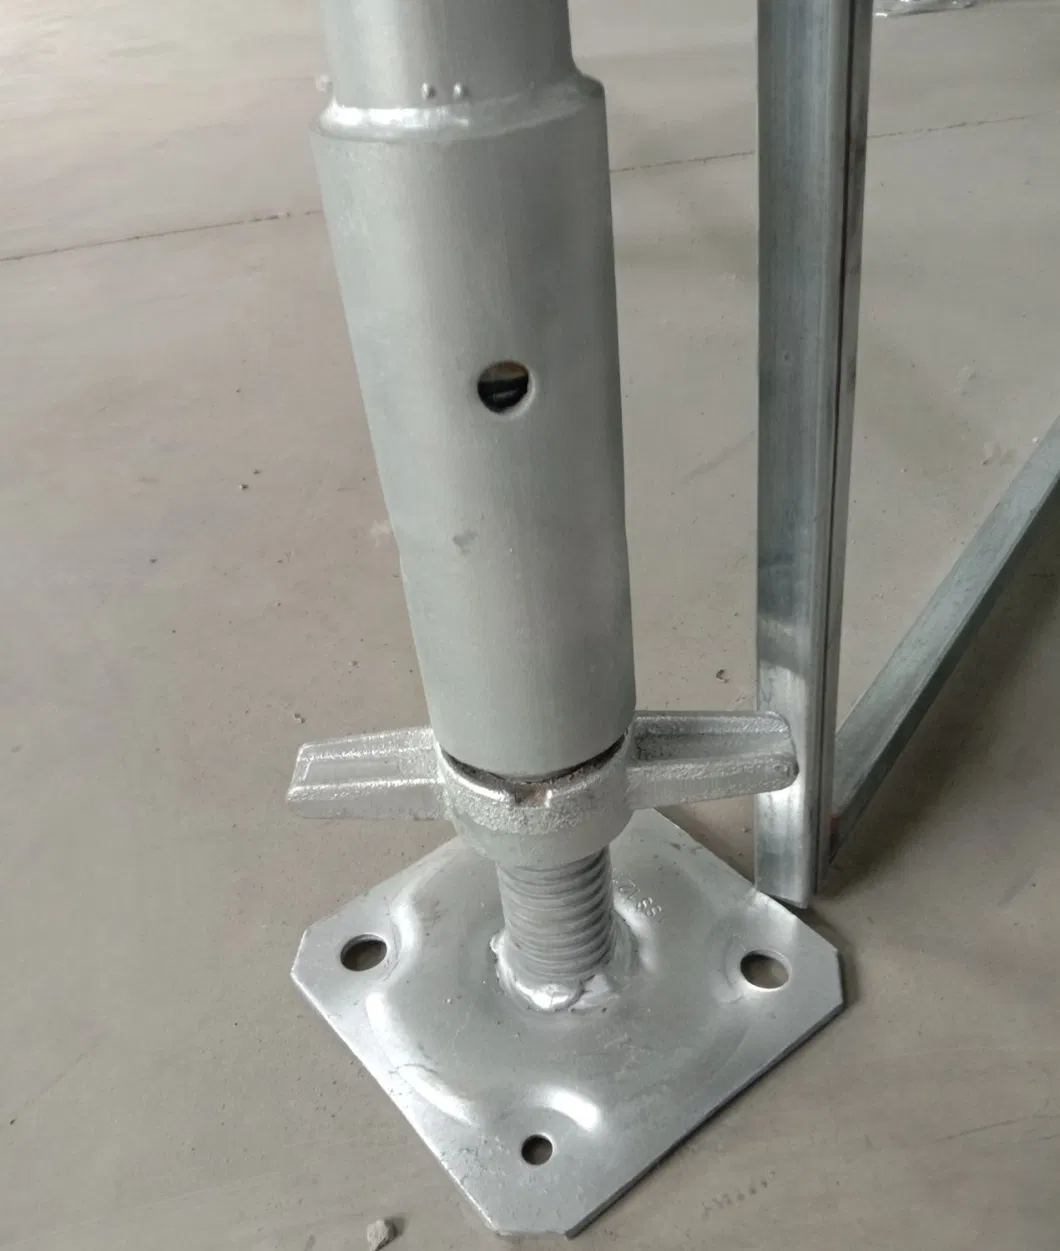 Hot DIP Galvanized Solid Base Jacks Scaffolding Accessories